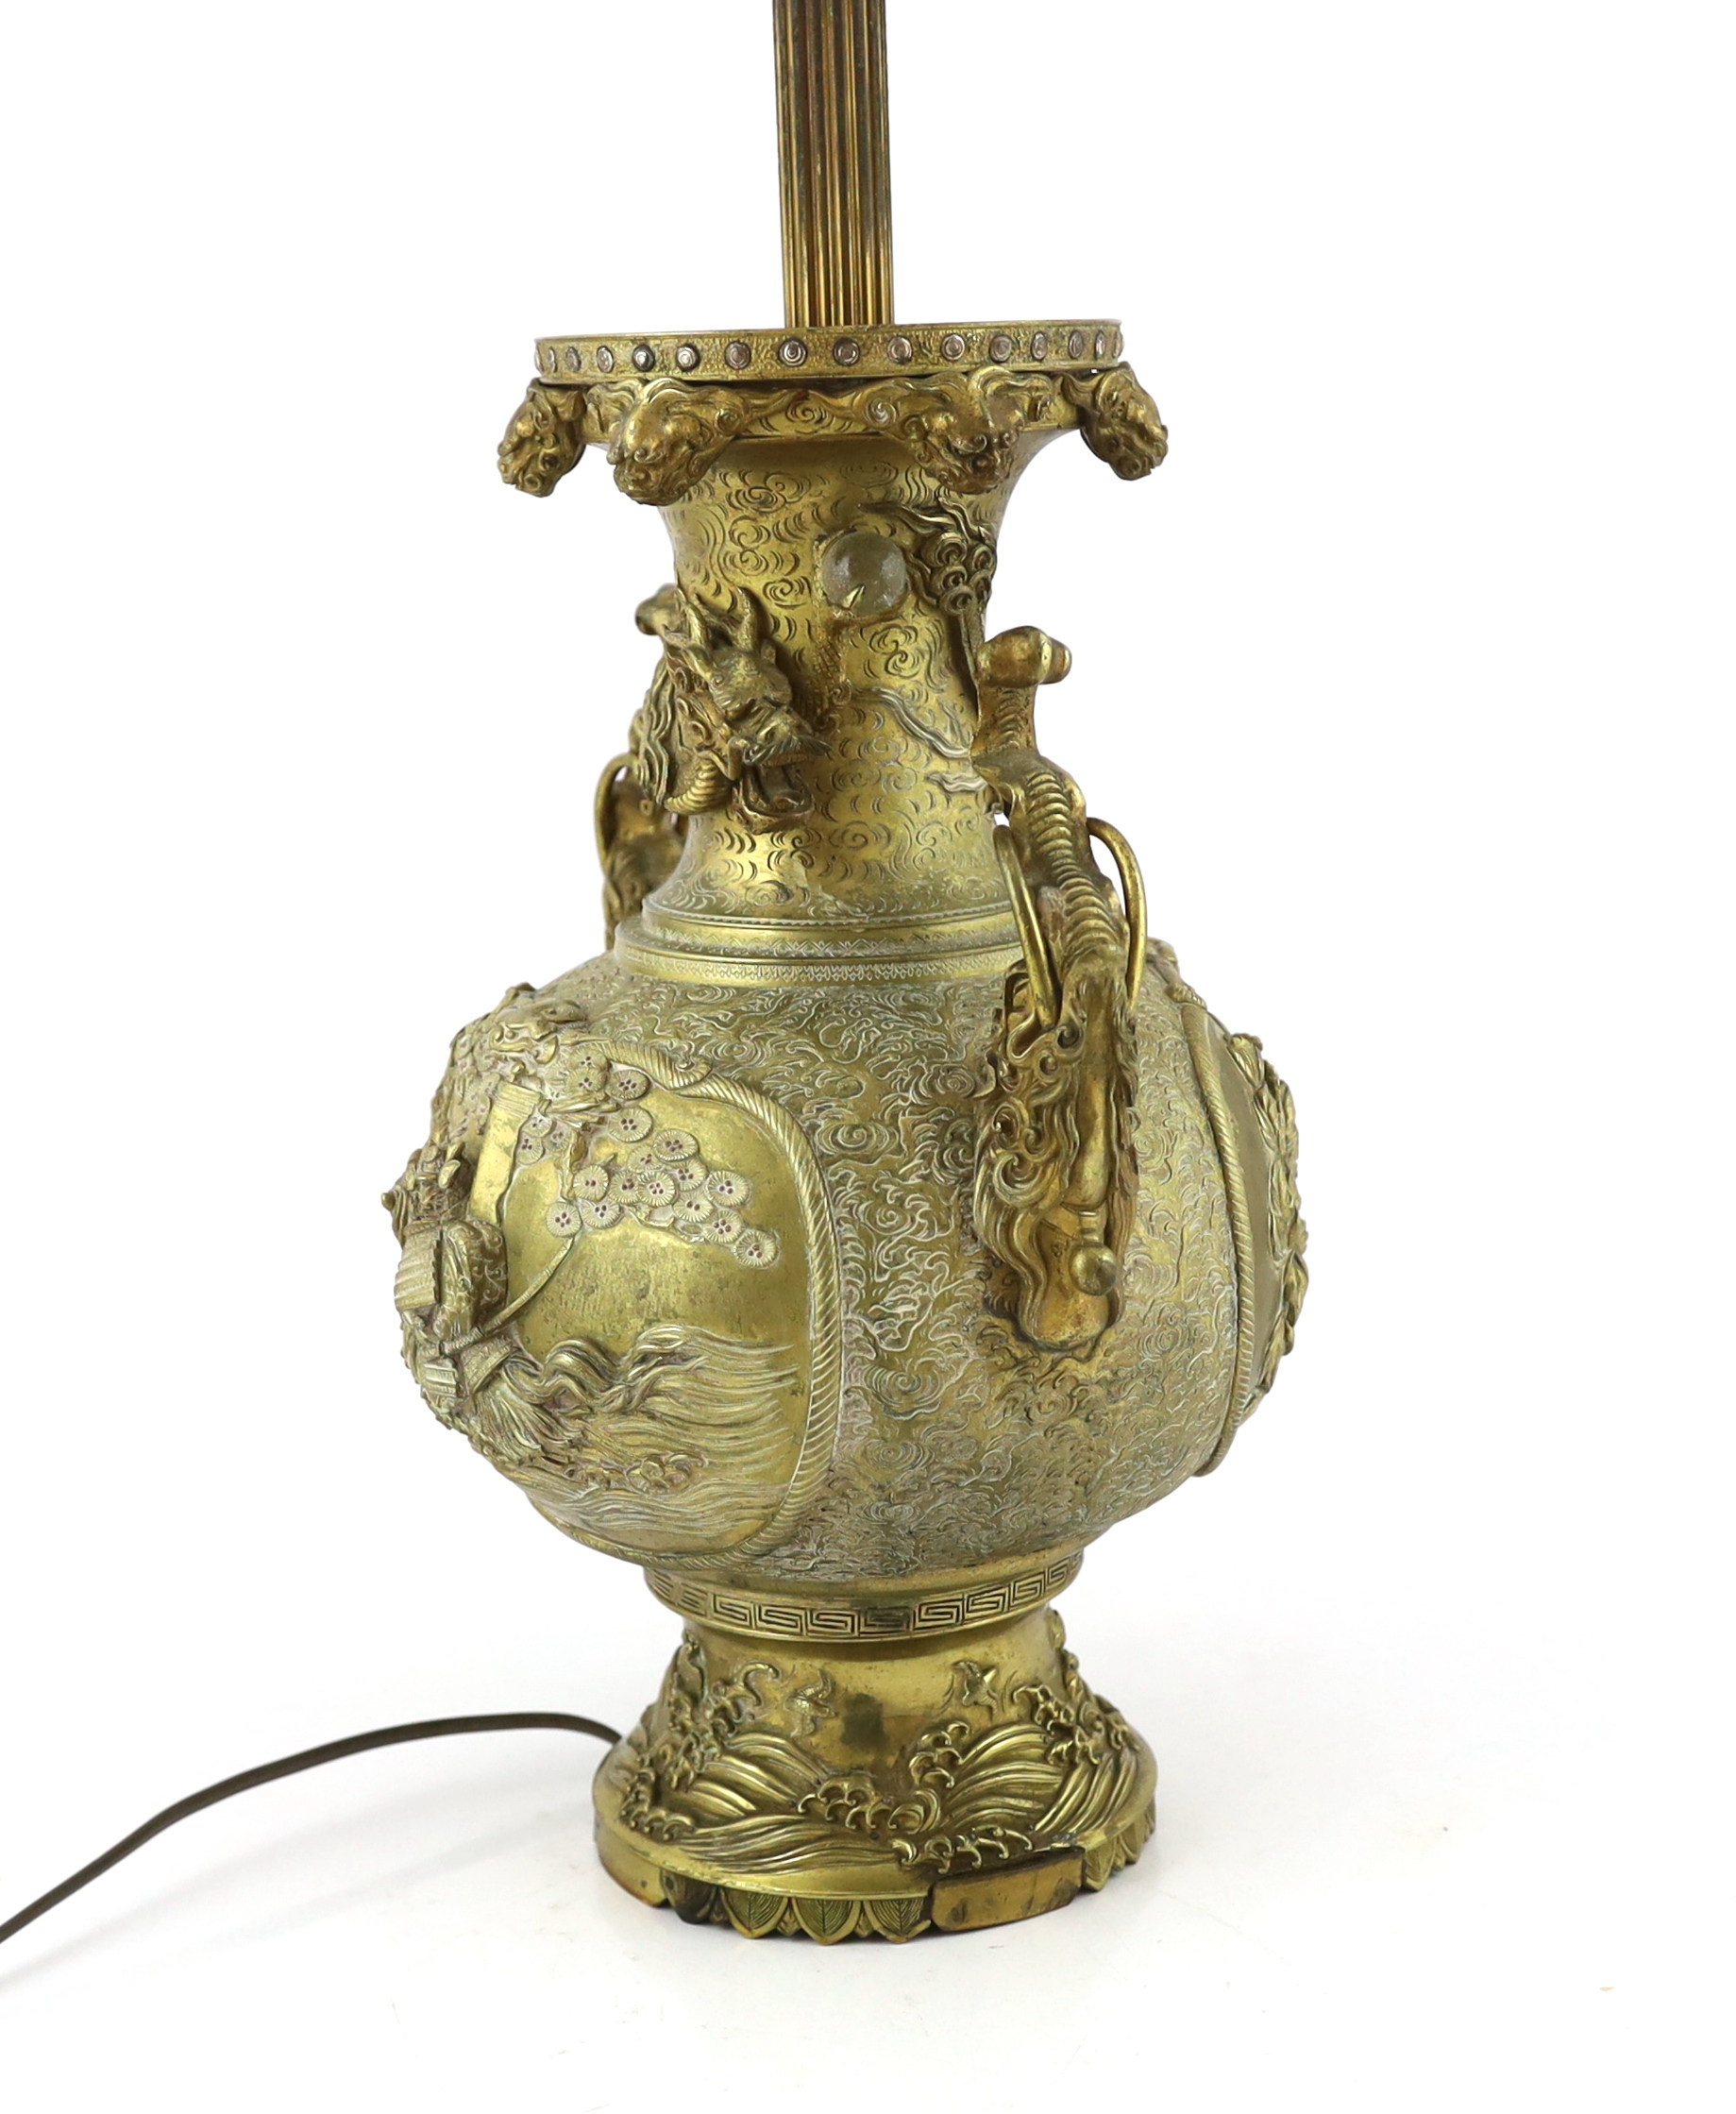 A Japanese gilt bronze 'Samurai' vase, early 20th century, later mounted as a lamp, repairs to base